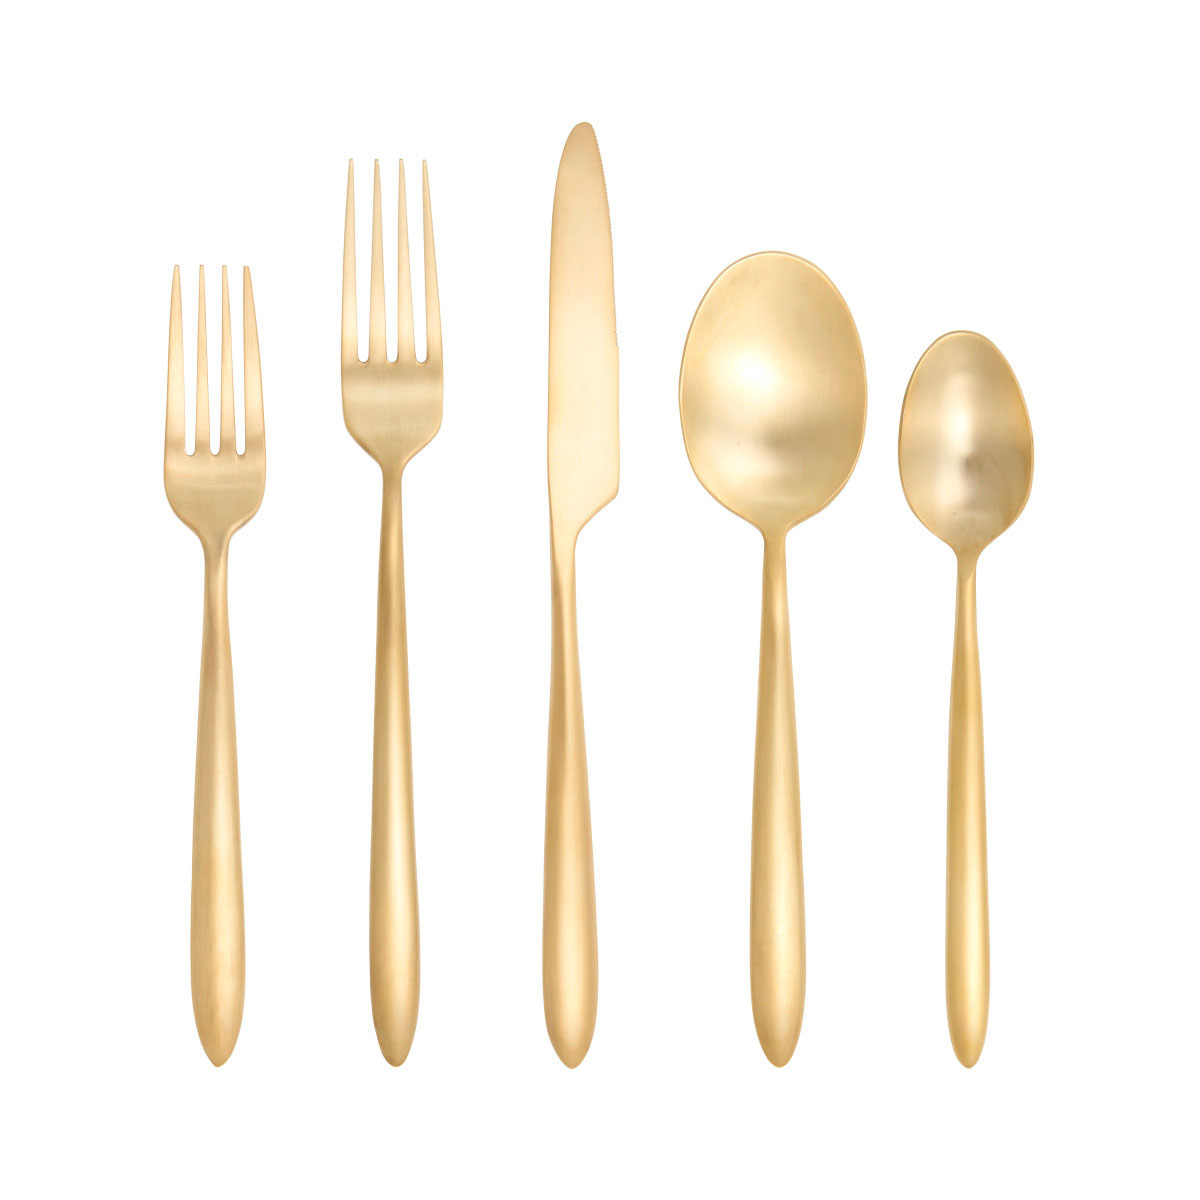 Fortessa Stainless Flatware Velo Brushed Gold Plated 20 Piece Place Setting